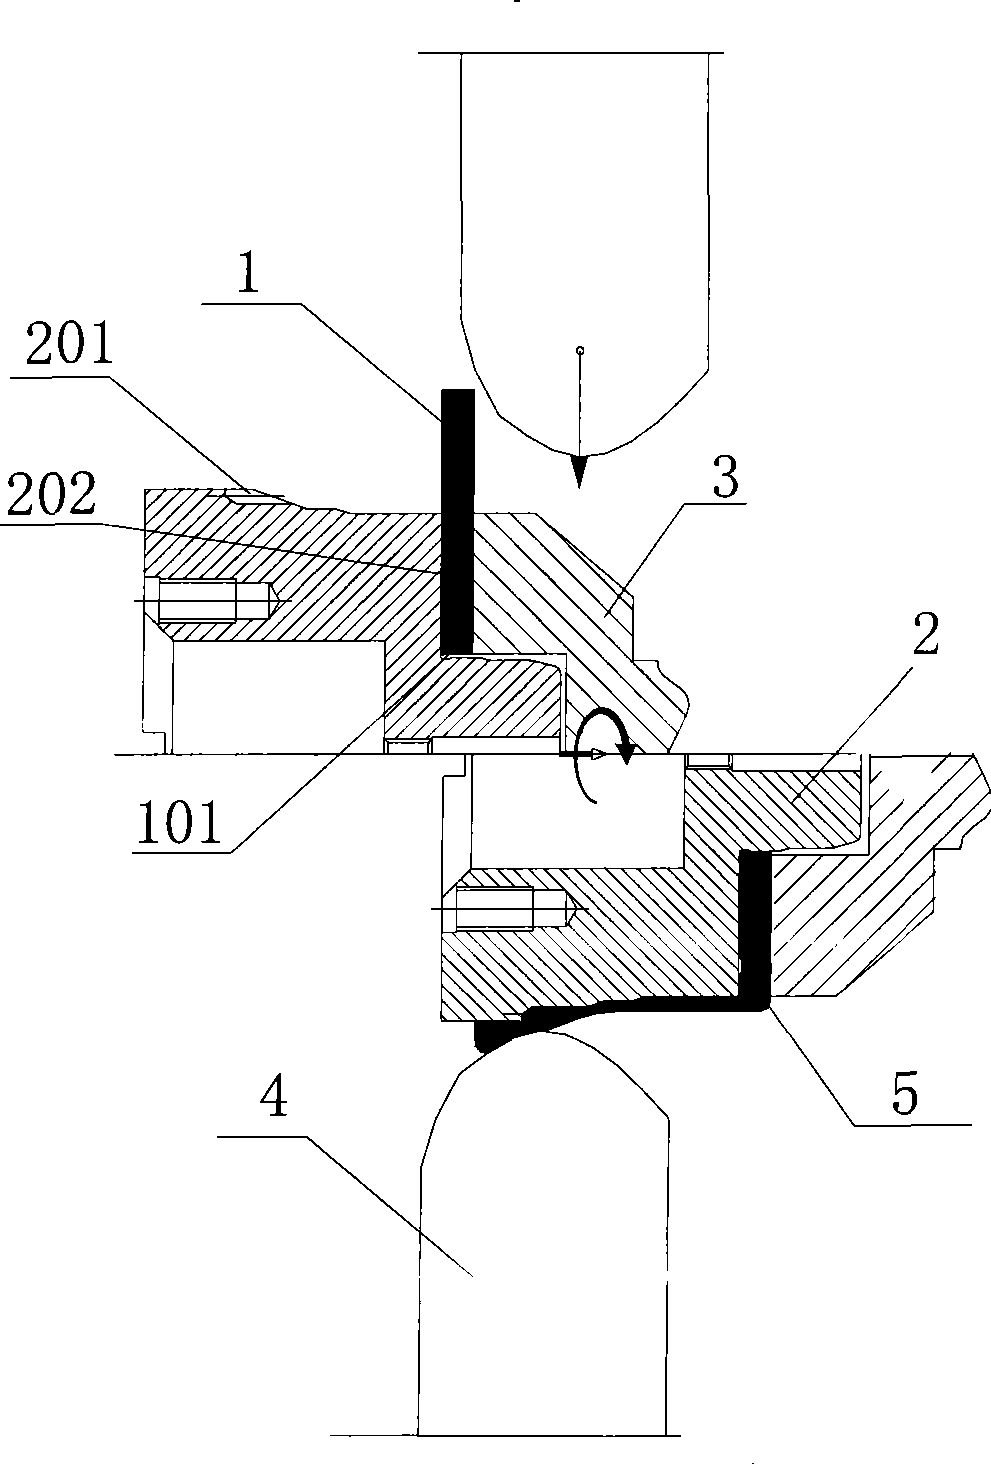 Method for producing clutch output bracket